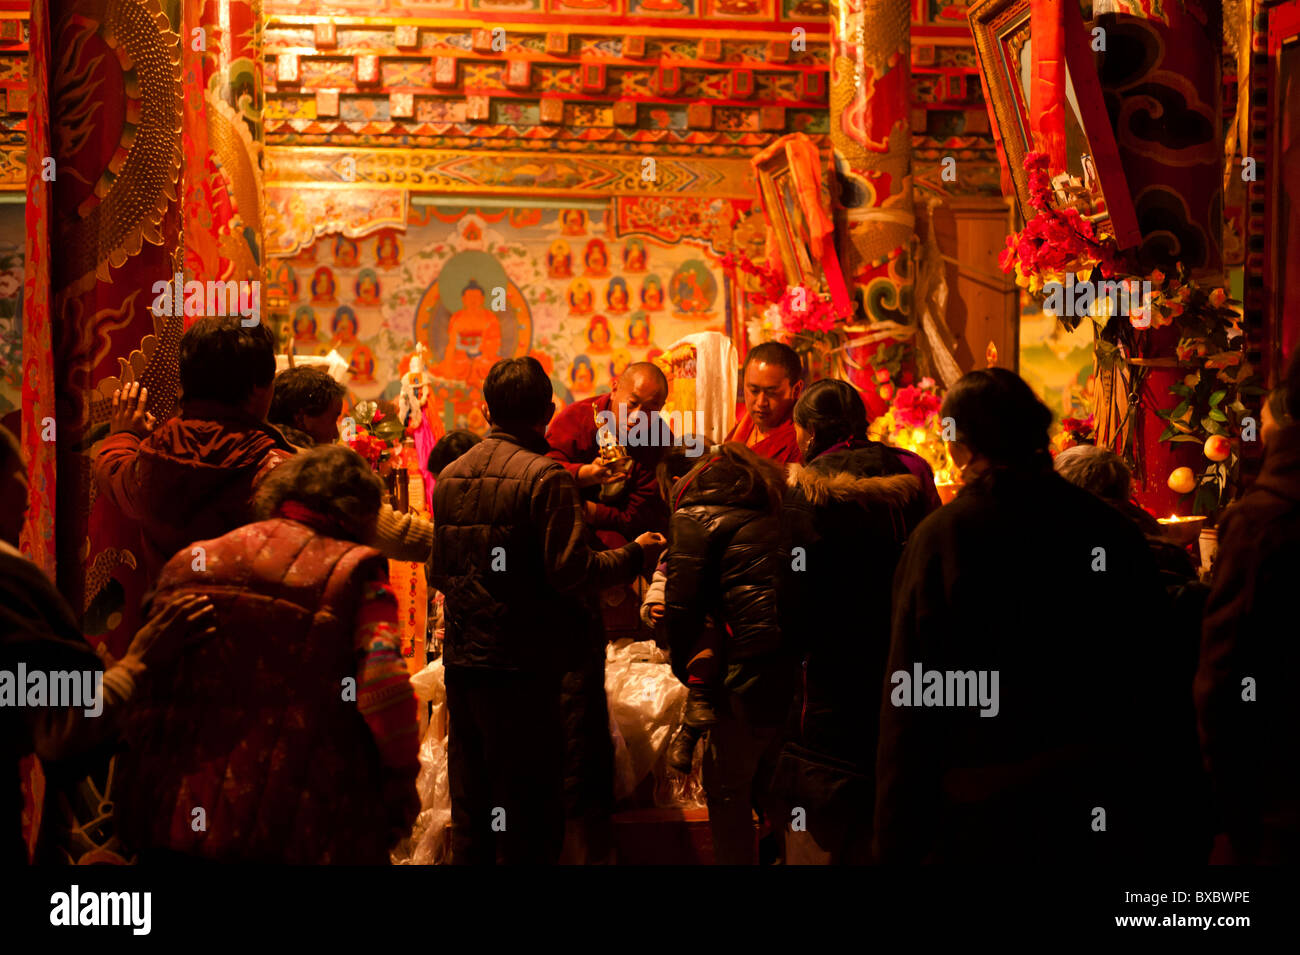 A Tibetan monk blesses lamaist adherents during a ceremony in Tagong Temple, Sichuan province, China Stock Photo